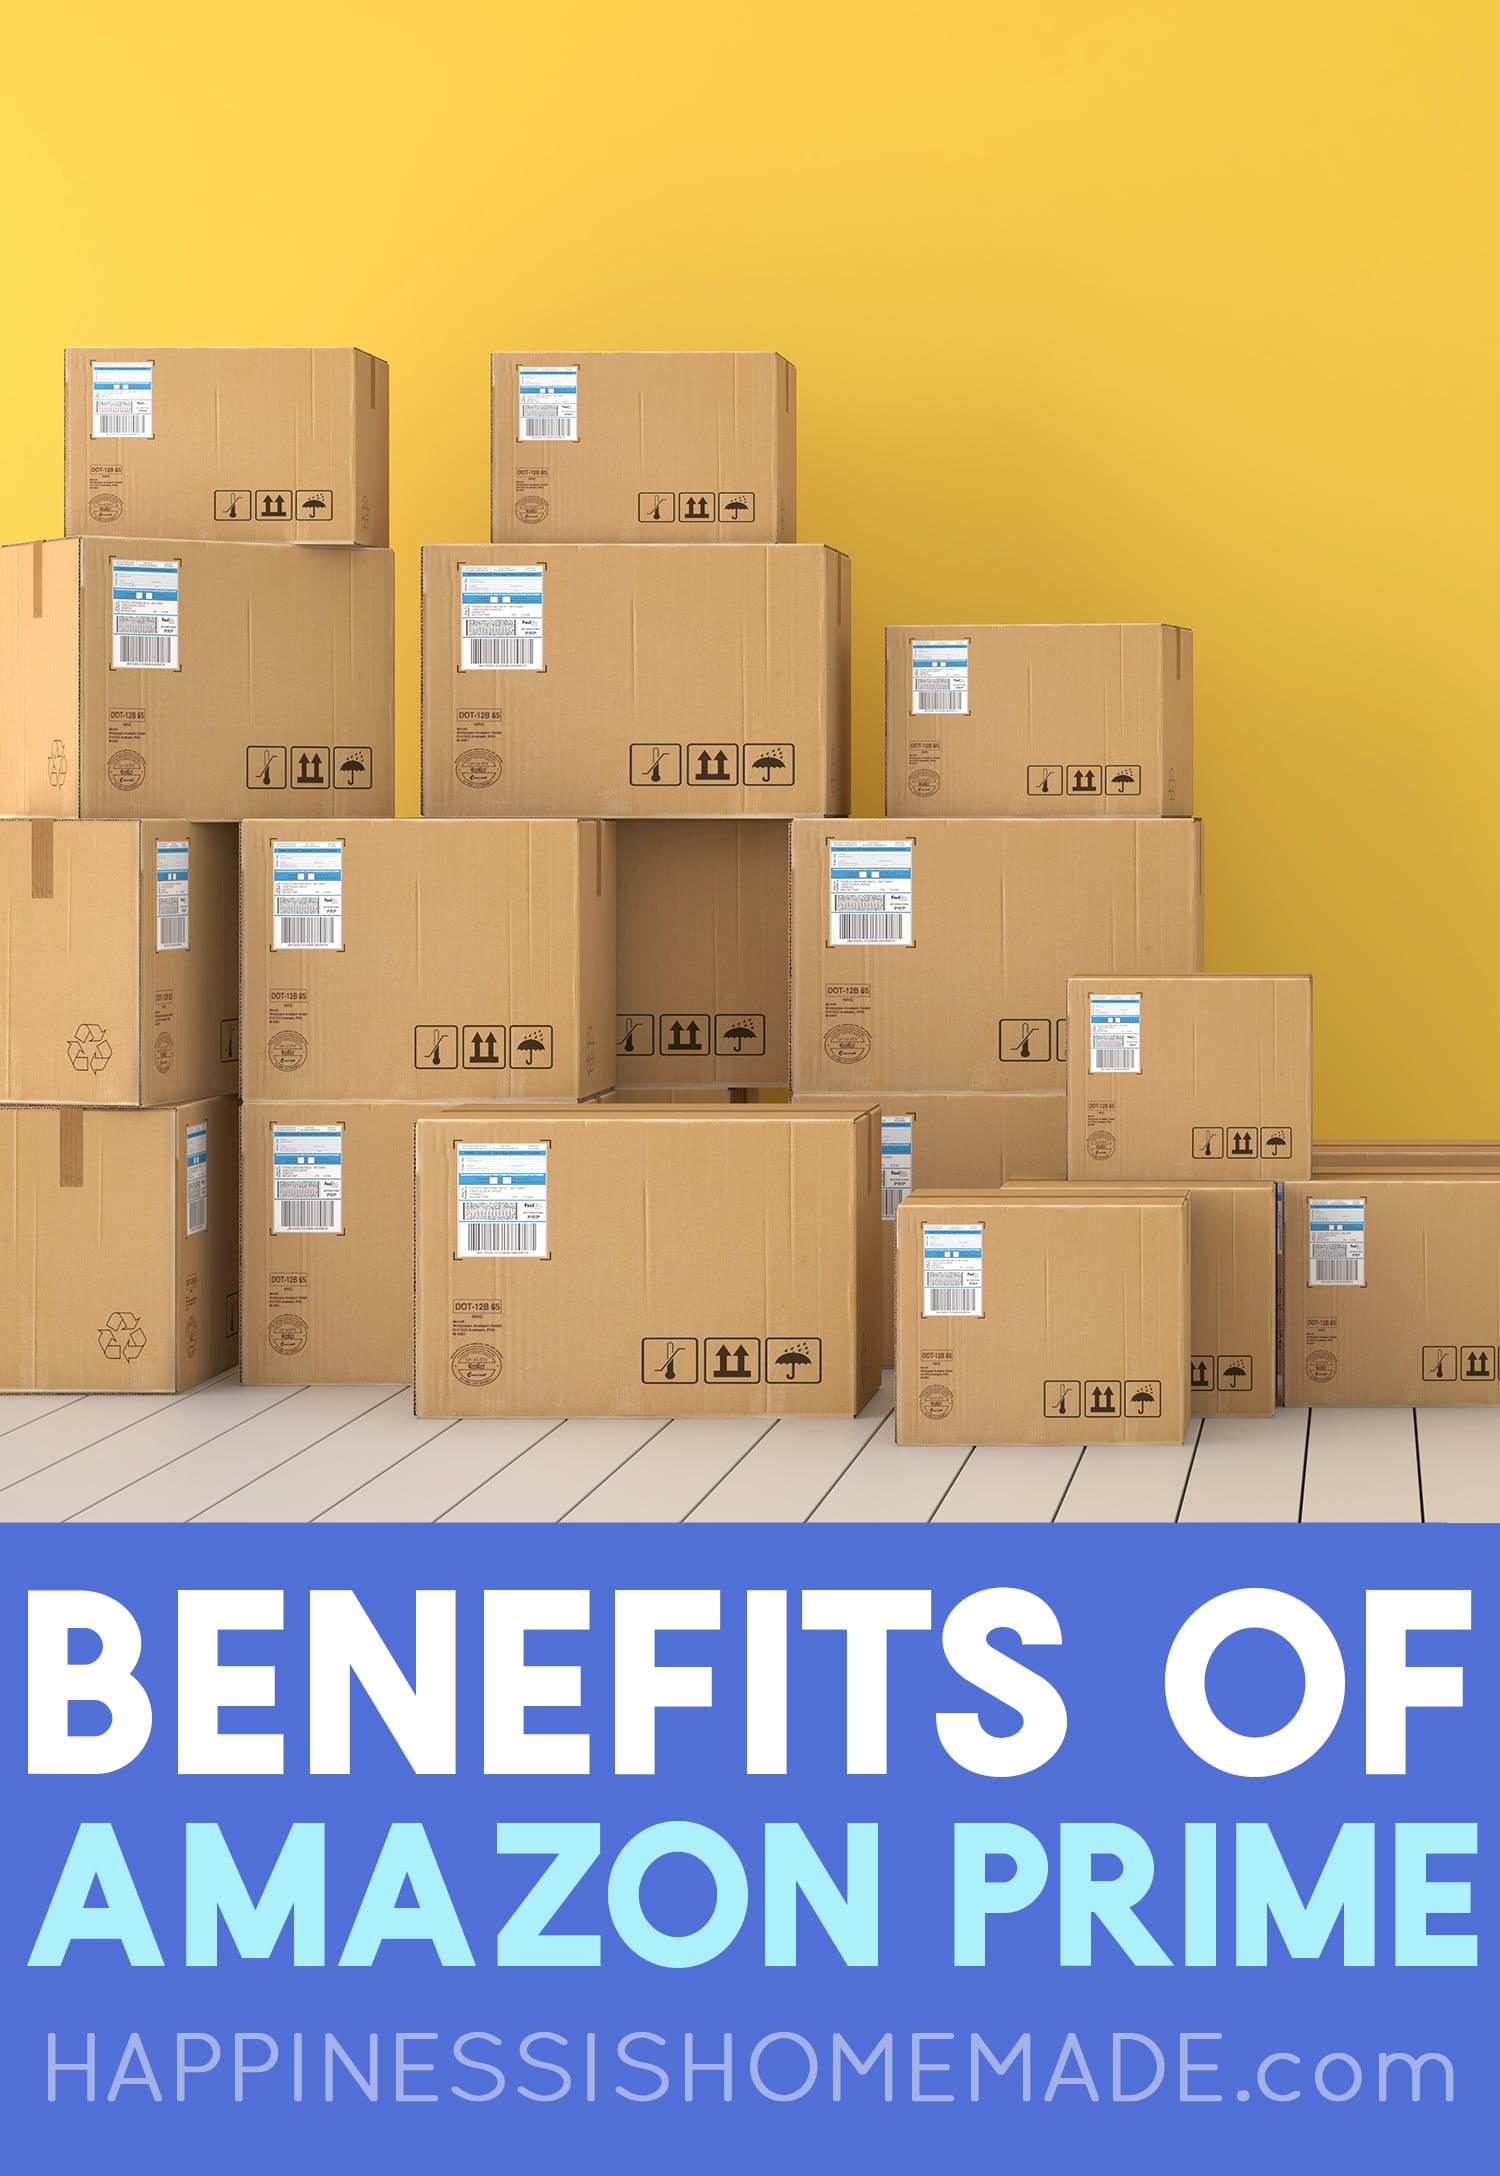 Amazon Prime Benefits: 17 Perks You May Not Know About!